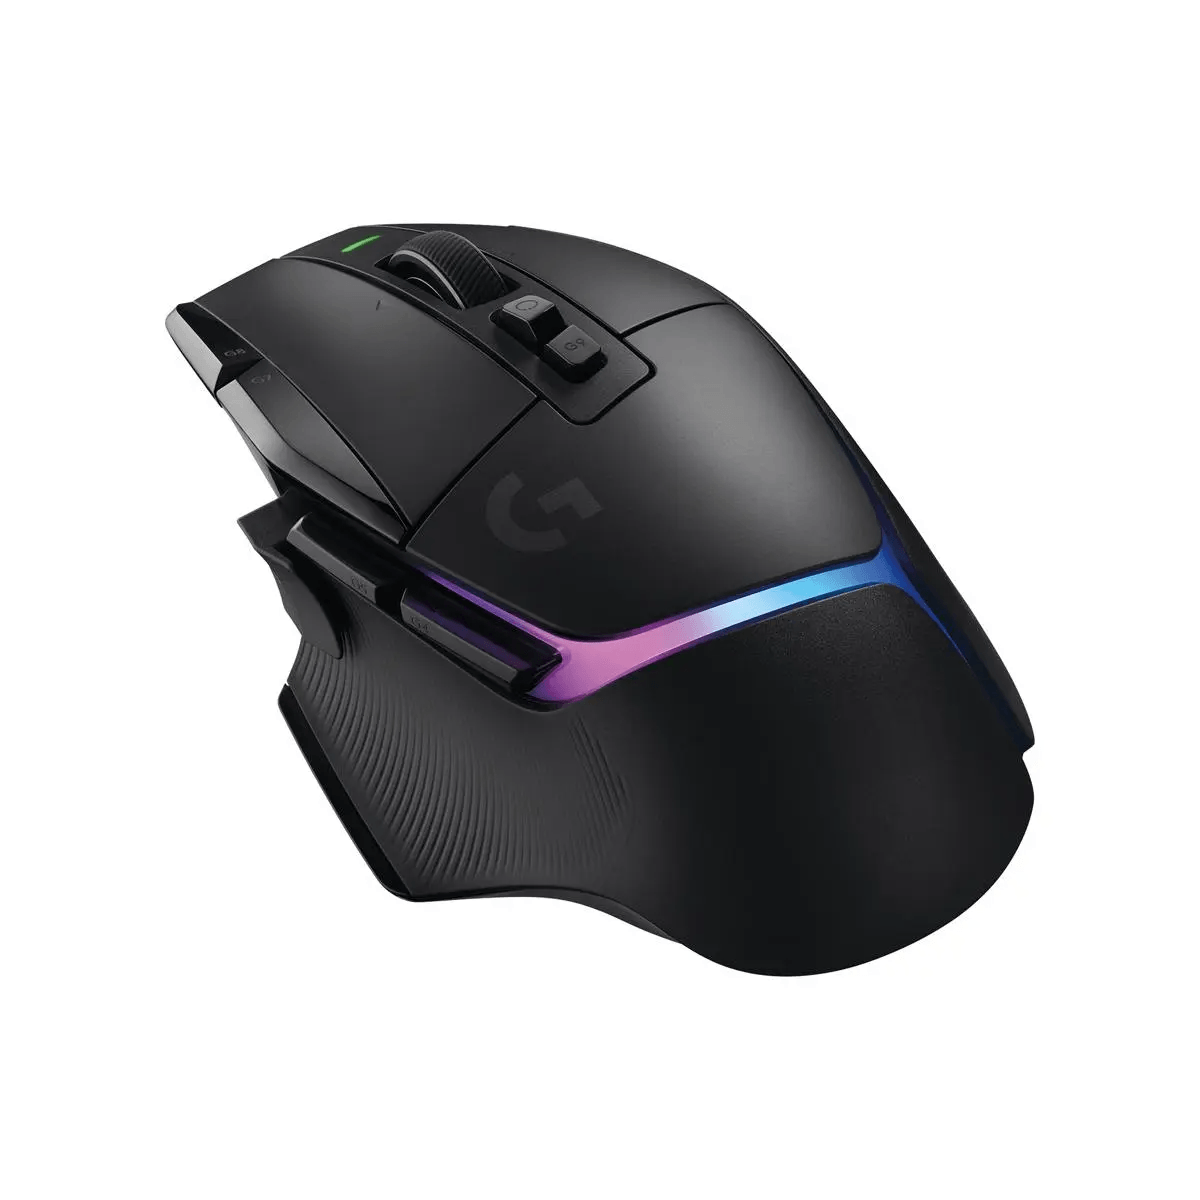 Best Gamming Mouse